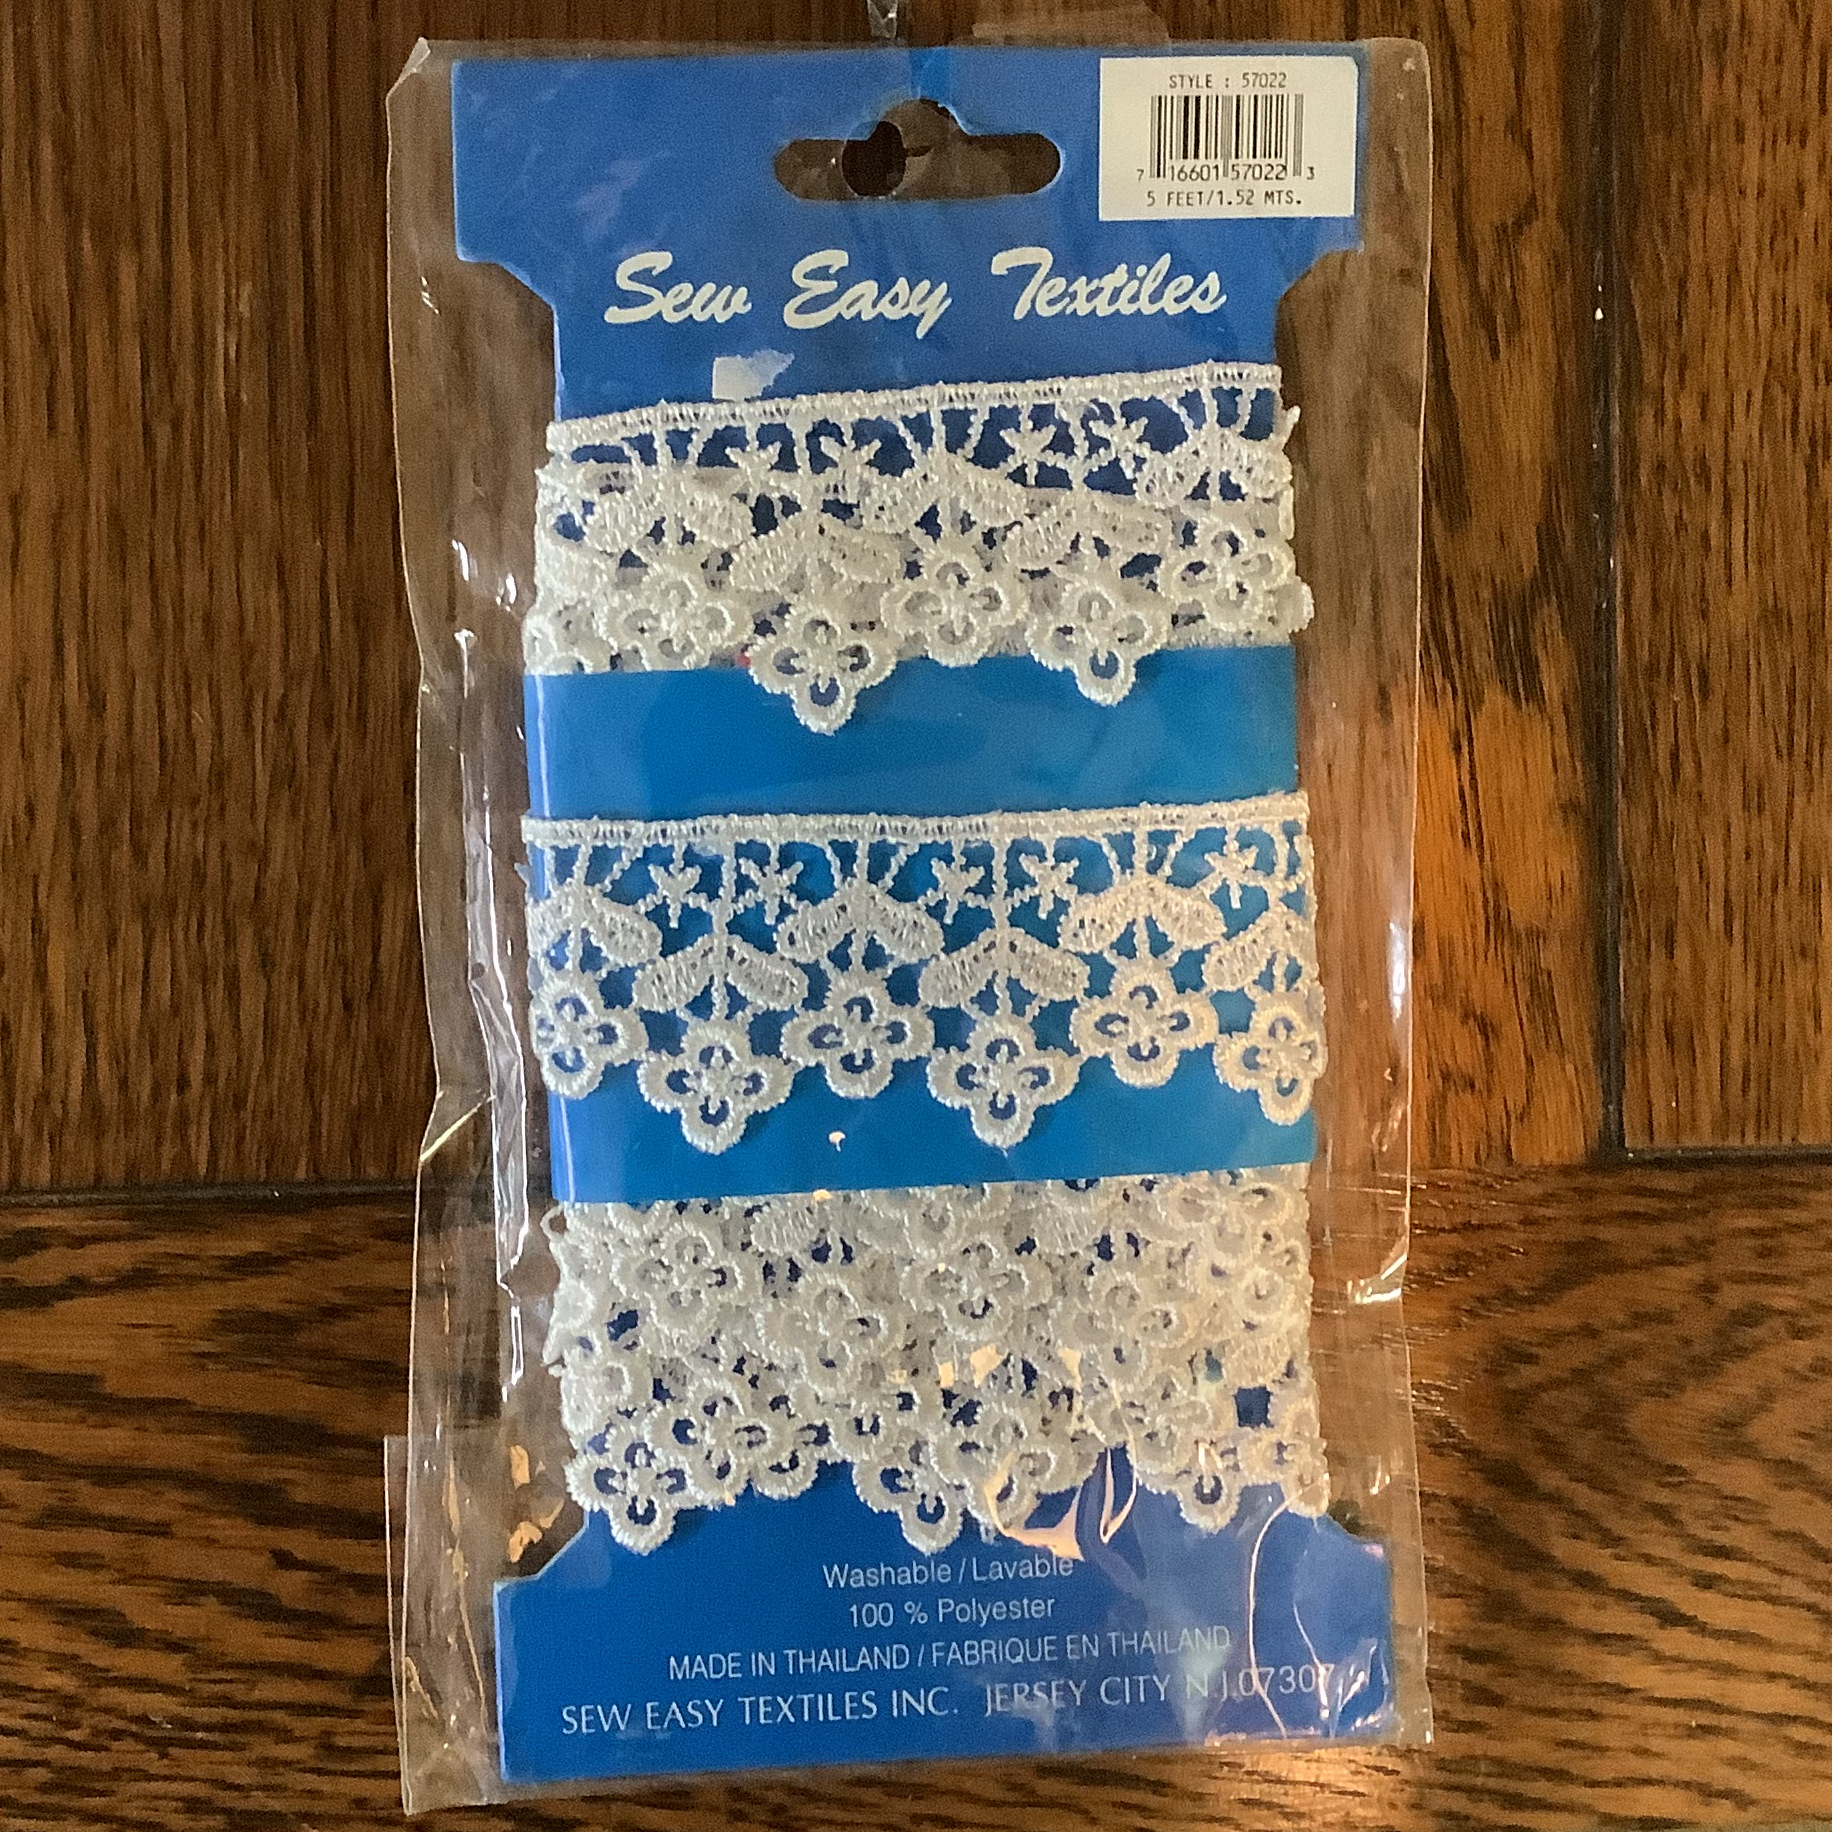 Card of synthetic white lace with daisy pattern